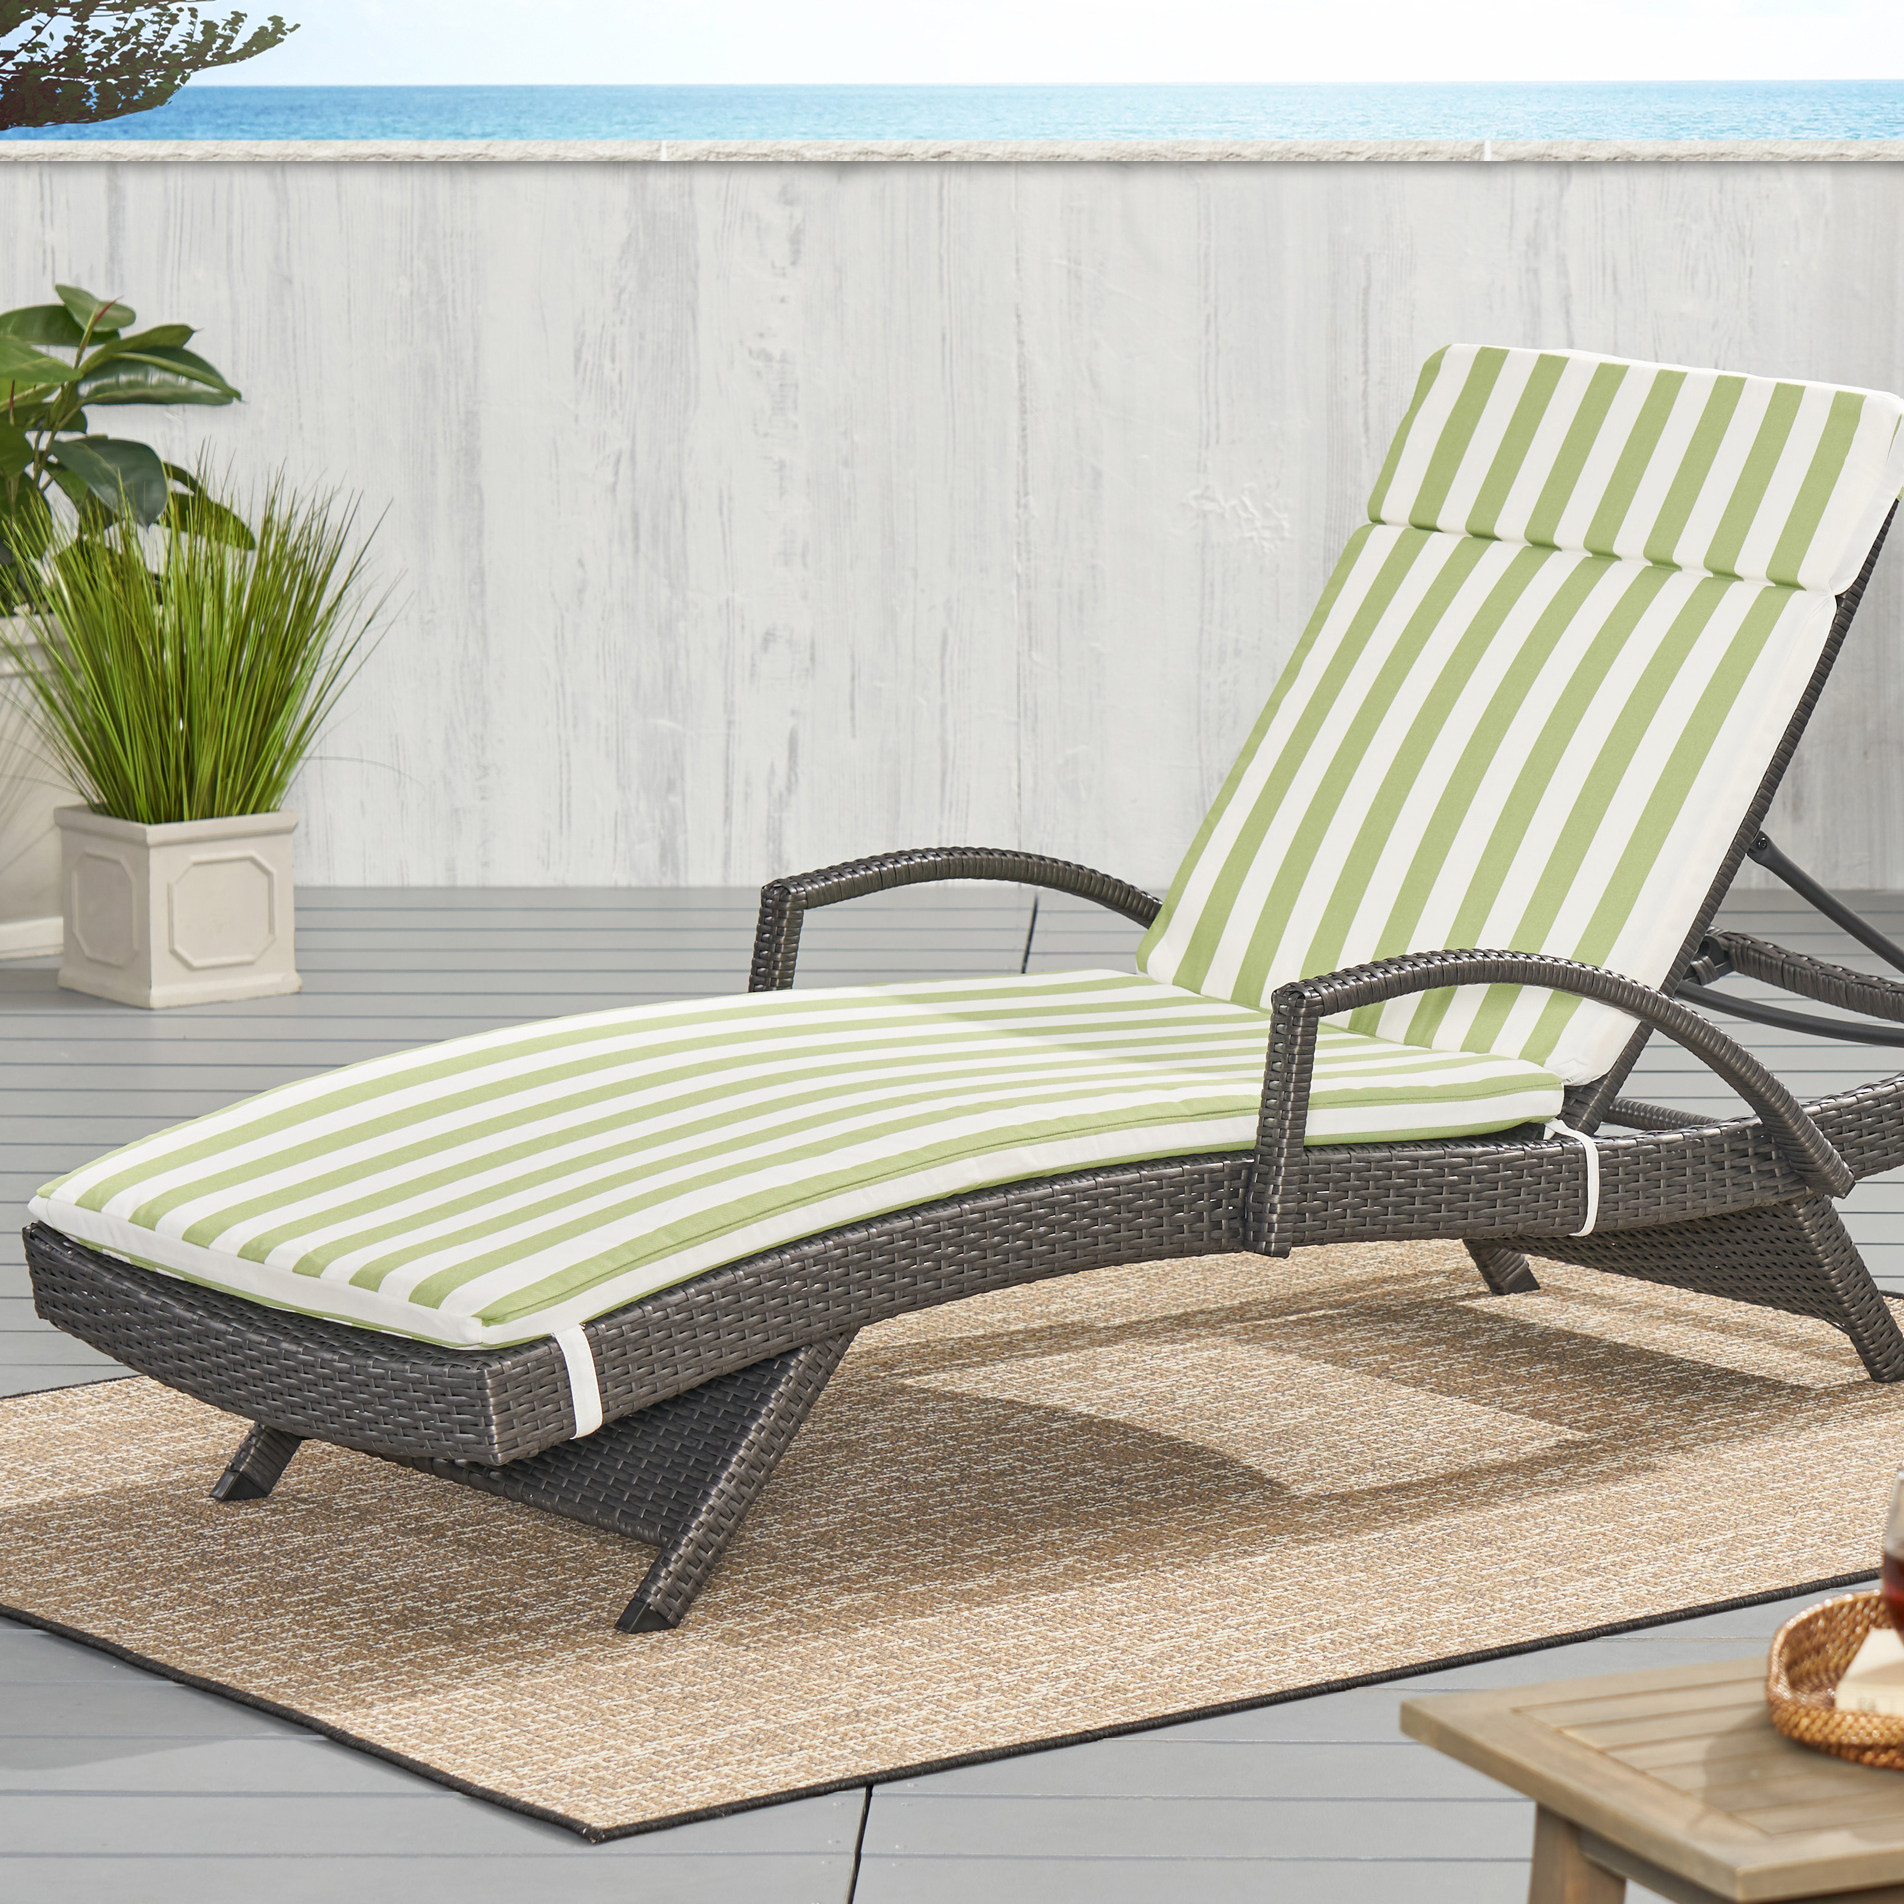 Anthony Outdoor Water Resistant Chaise Lounge Cushion, Green and White Stripe - image 1 of 6